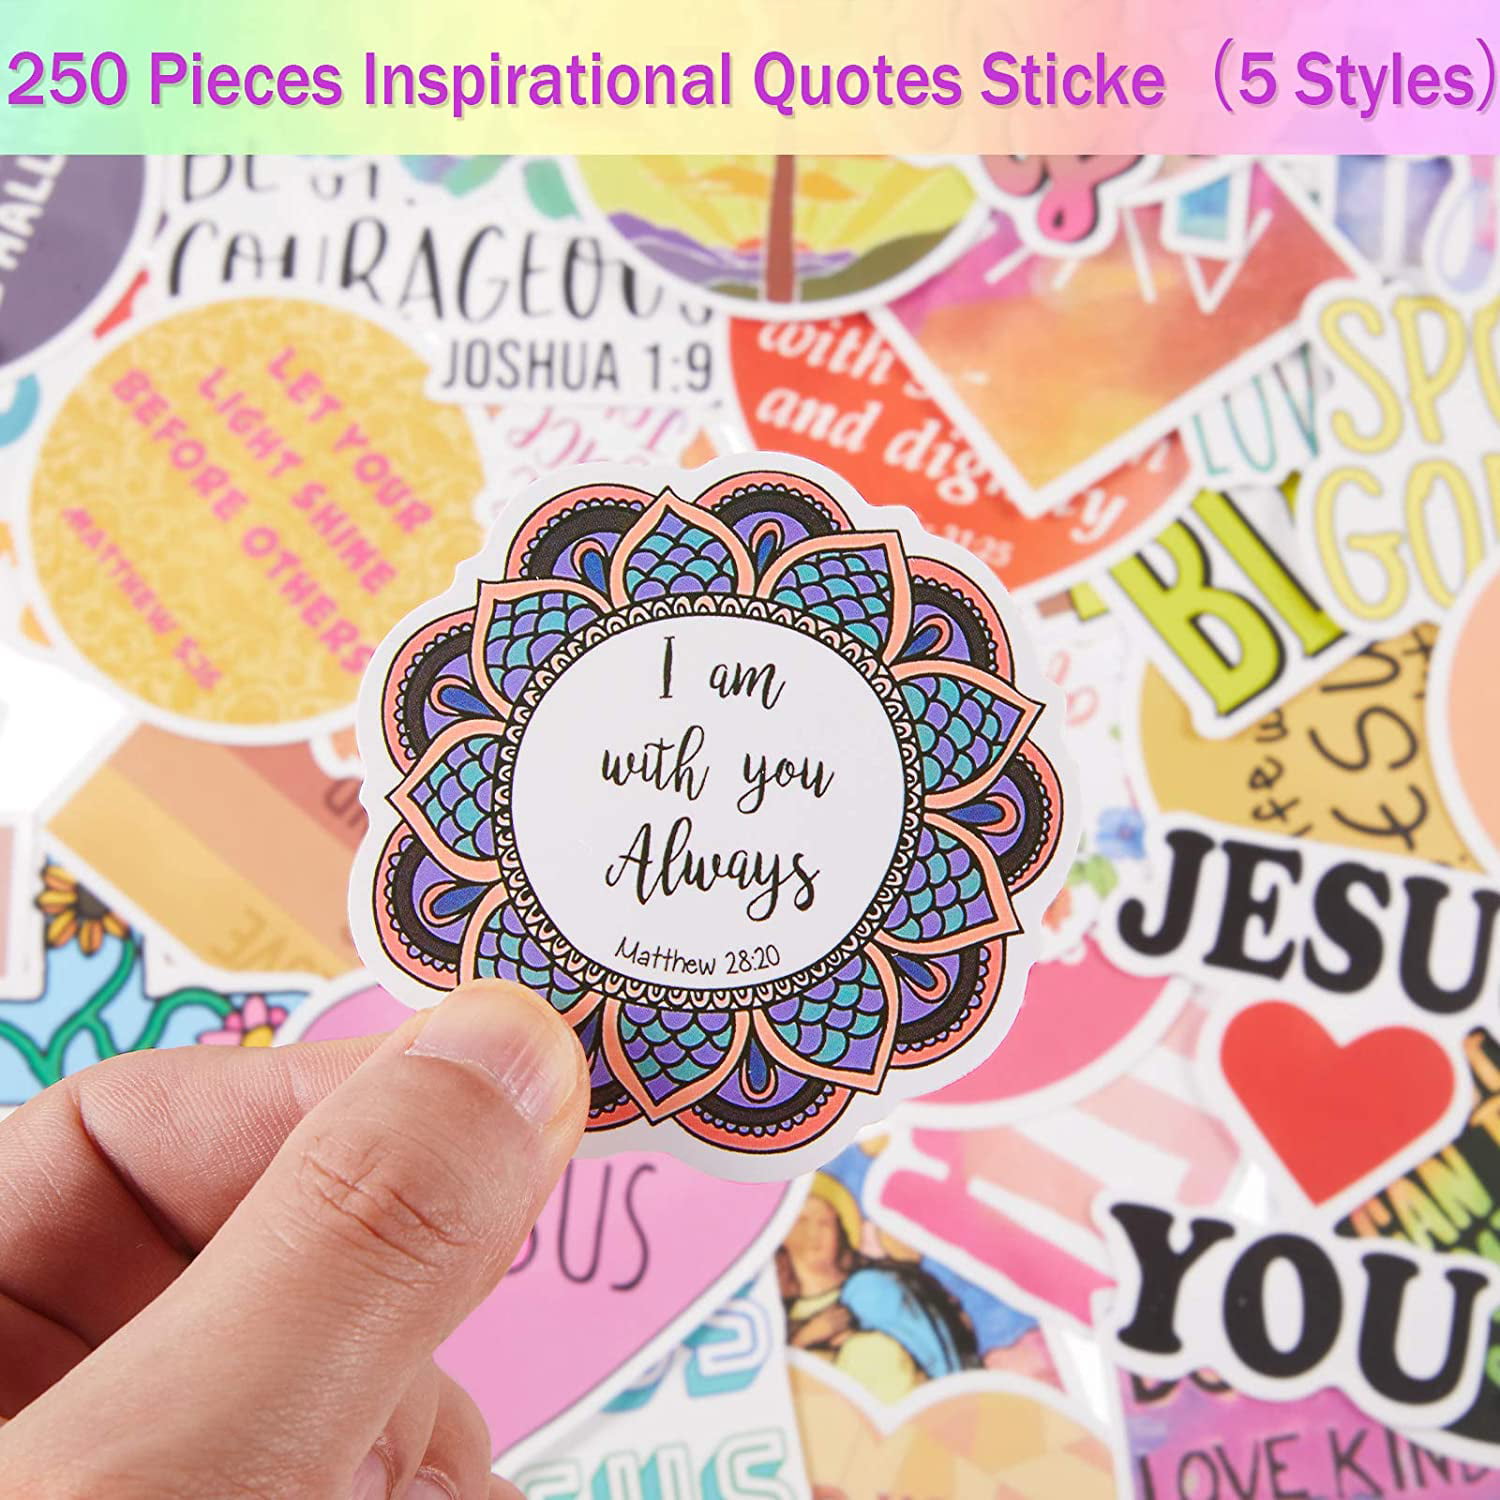 250 Pieces Mixed Inspirational Stickers Motivational Jesus Faith Sticker Laptop Water Bottle Sticker Positive Quotes Vinyl Stickers Encourage Aesthetic Wisdom Word Stickers Decal